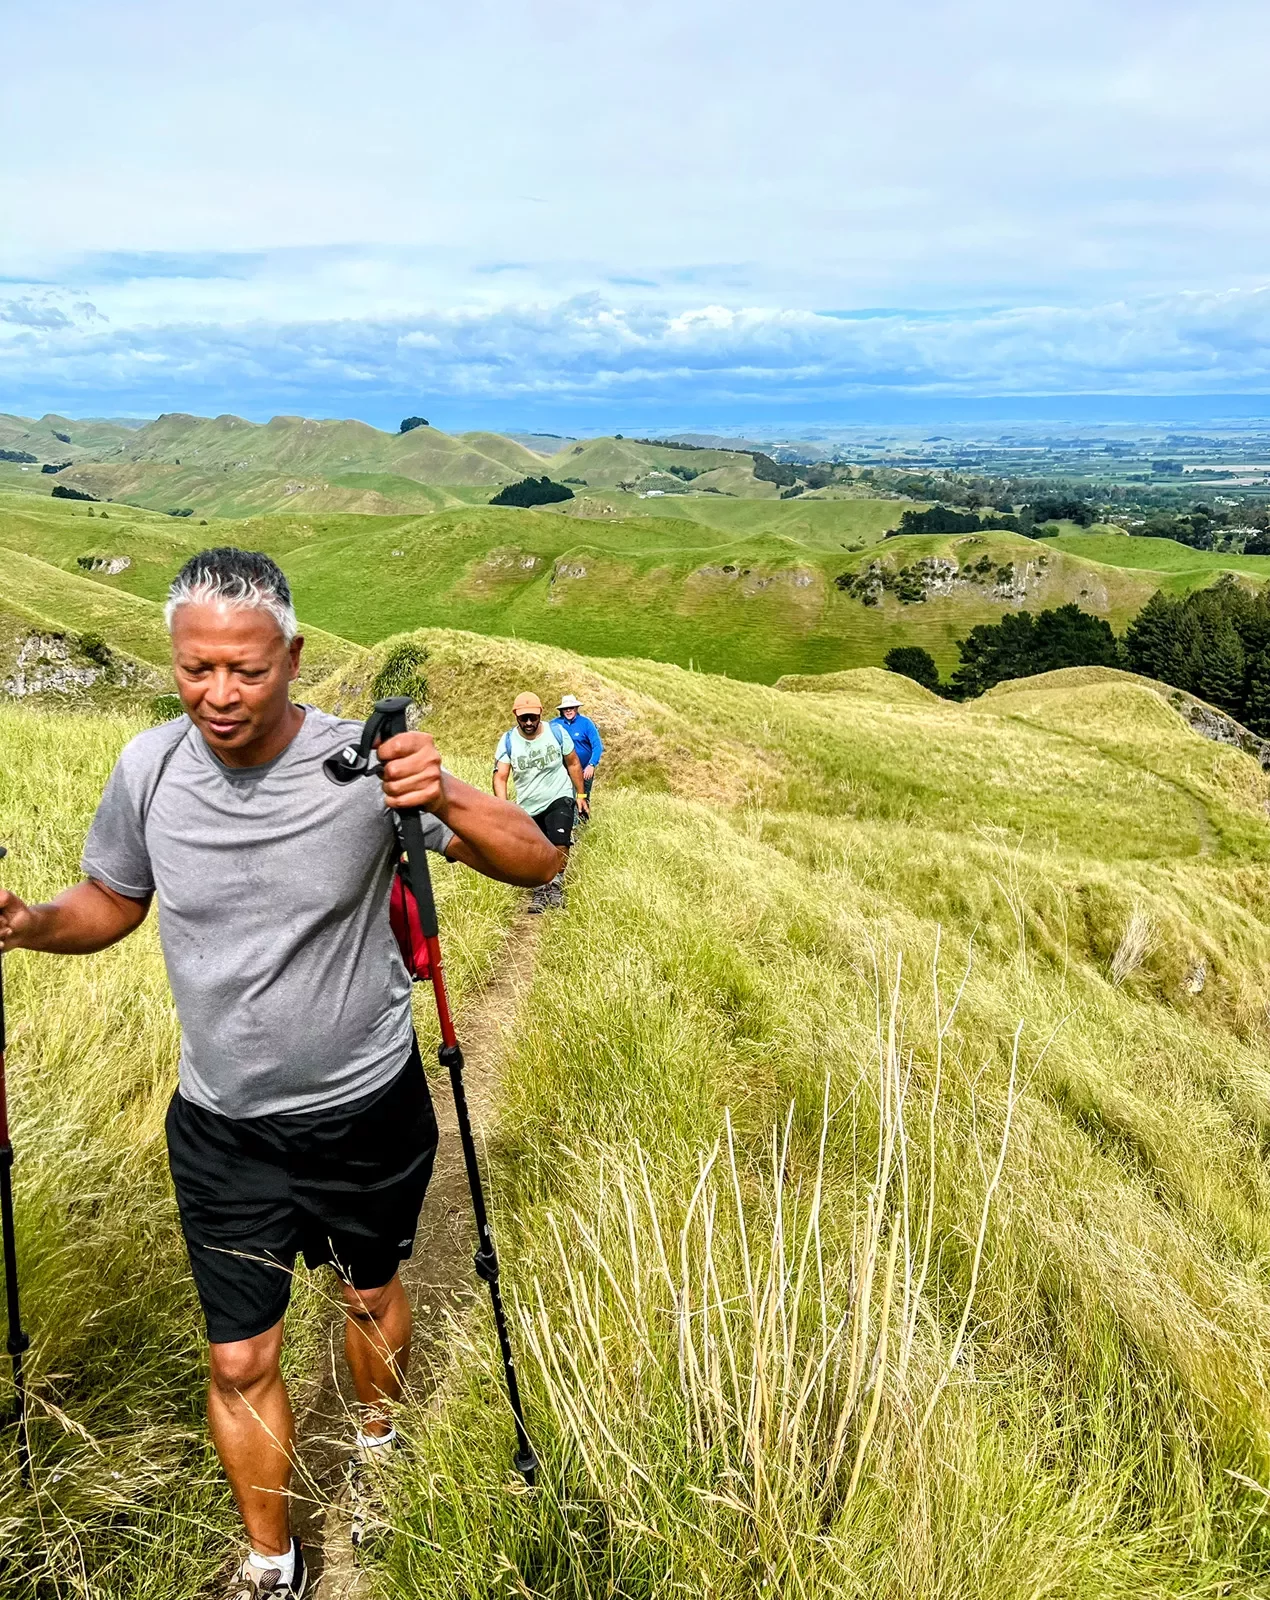 Hiking up a grassy hill in New Zealand